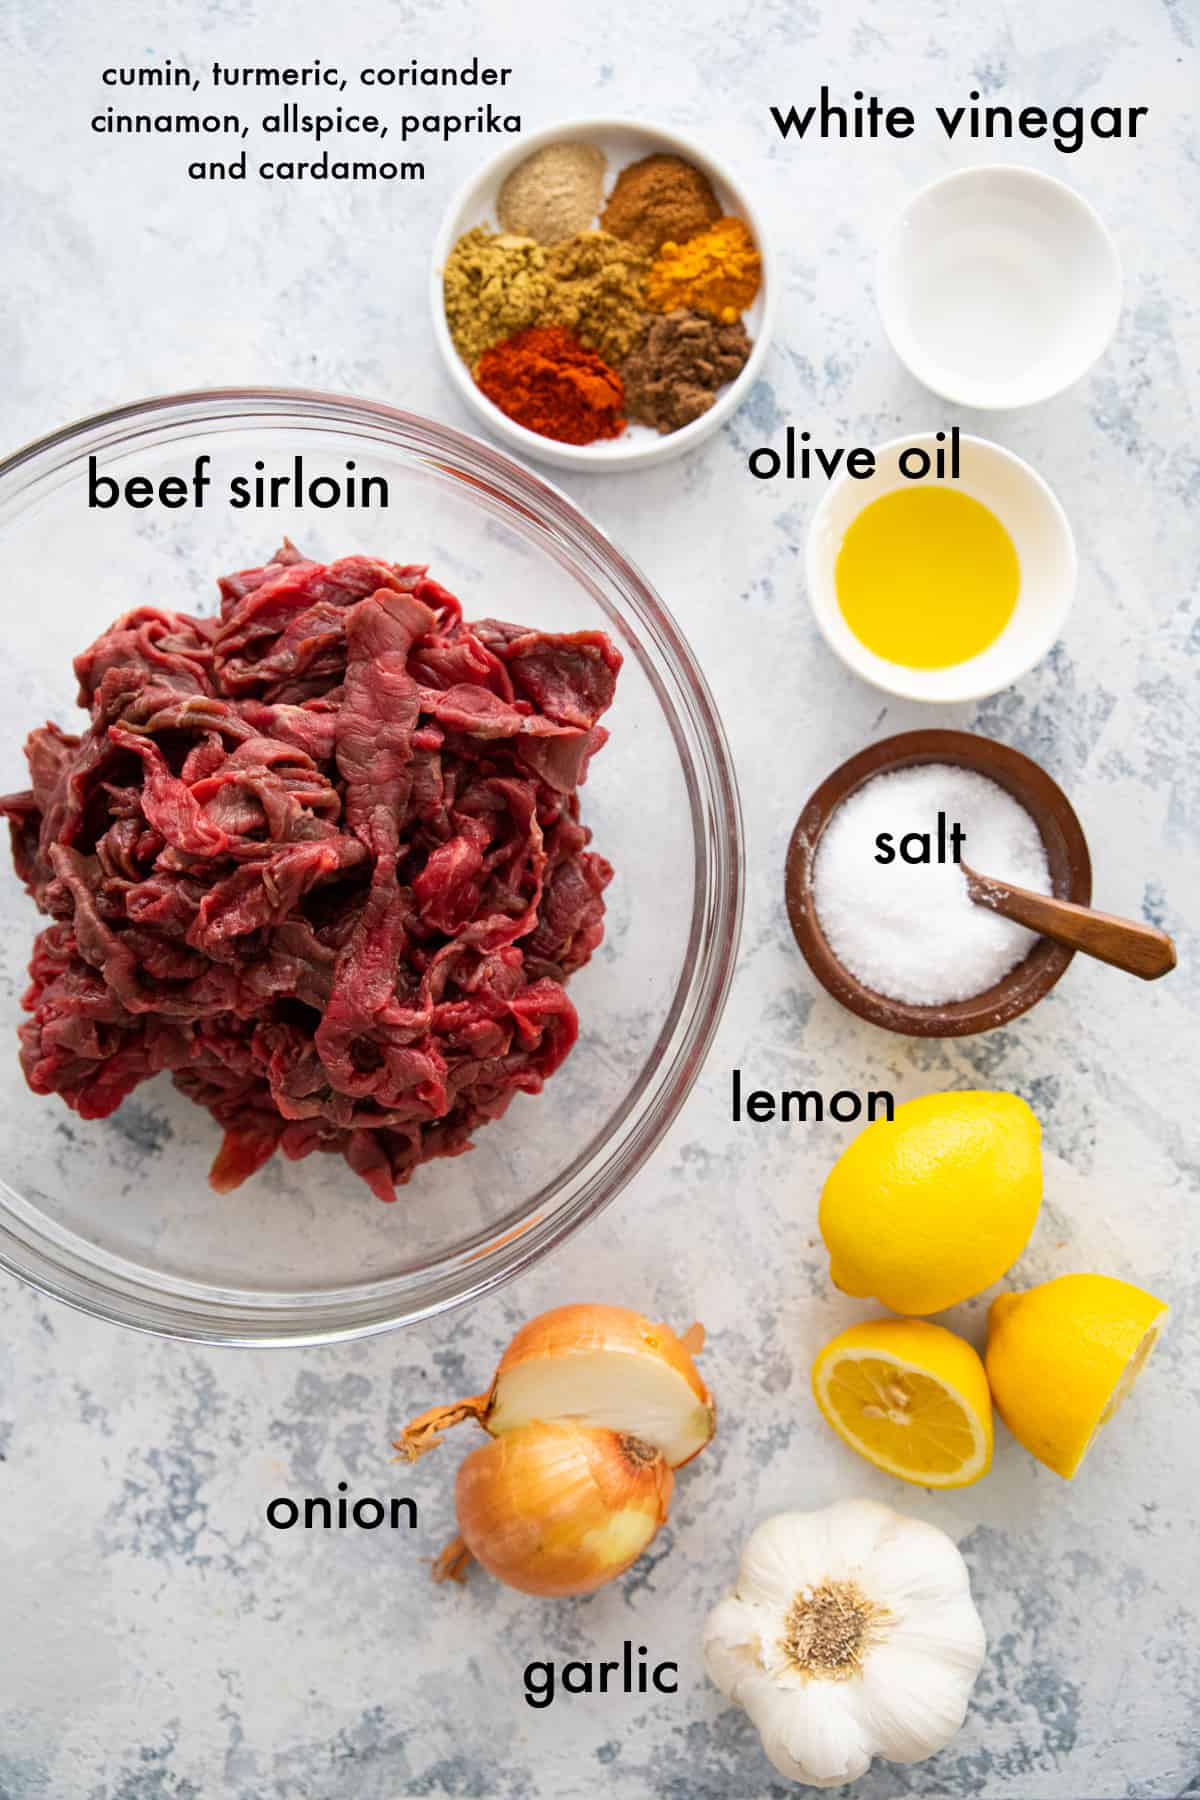 To make this middle eastern street food you need beef, spices, onion, lemon, garlic, olive oil and vinegar. 